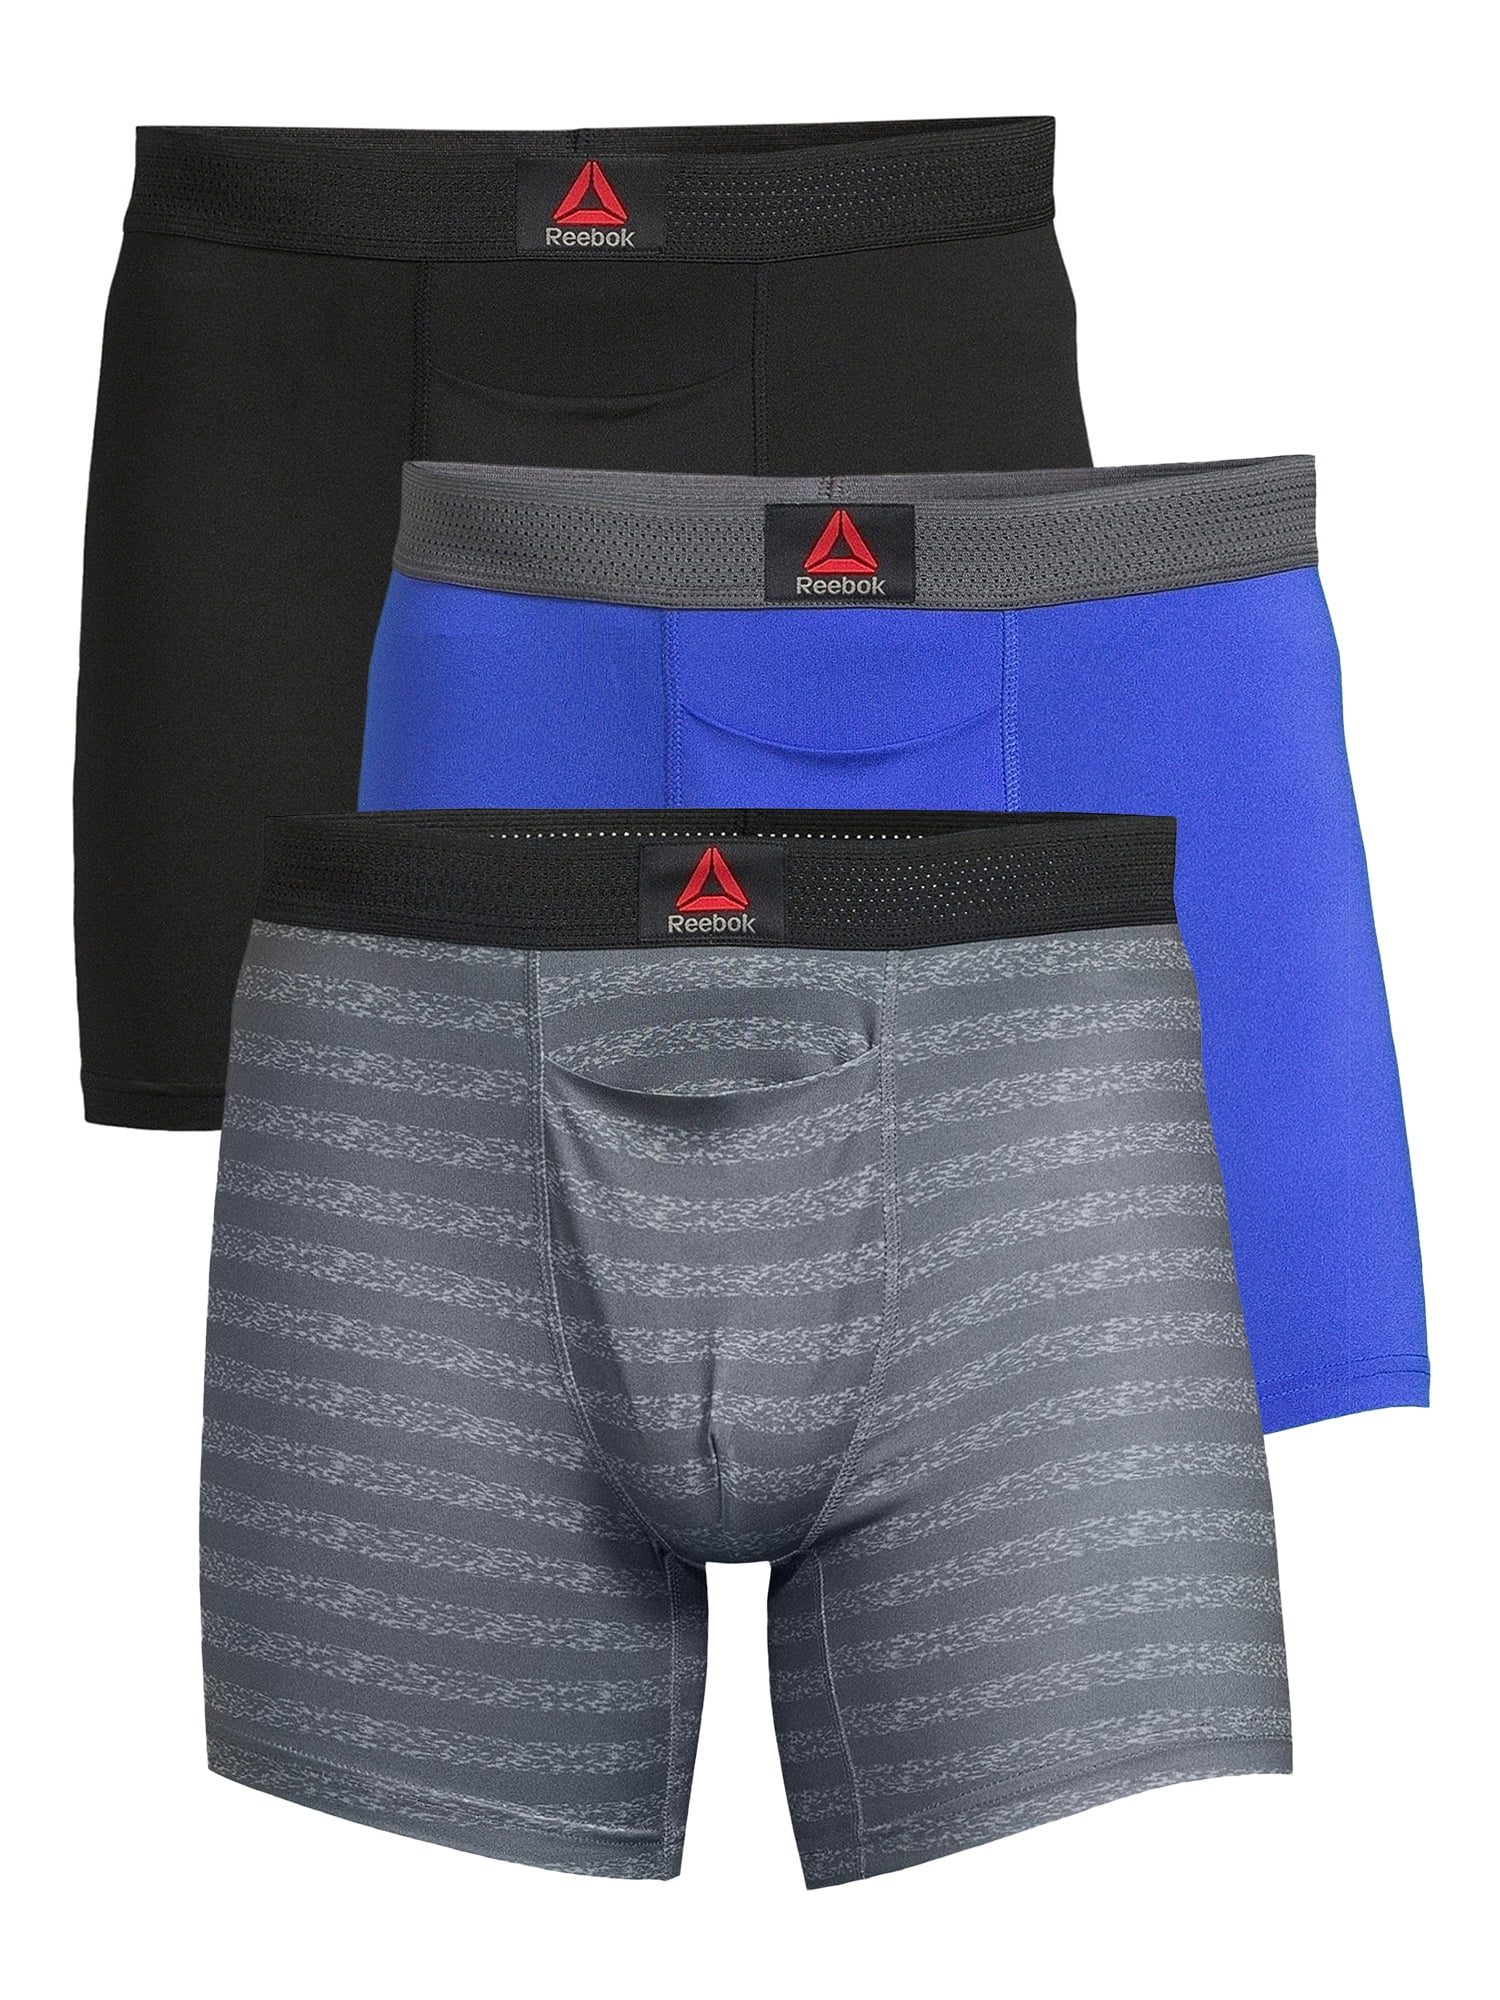 Manscaped Boxers: Men's Anti-Chafing Boxer Briefs with Sweat-Wicking Fibers  and